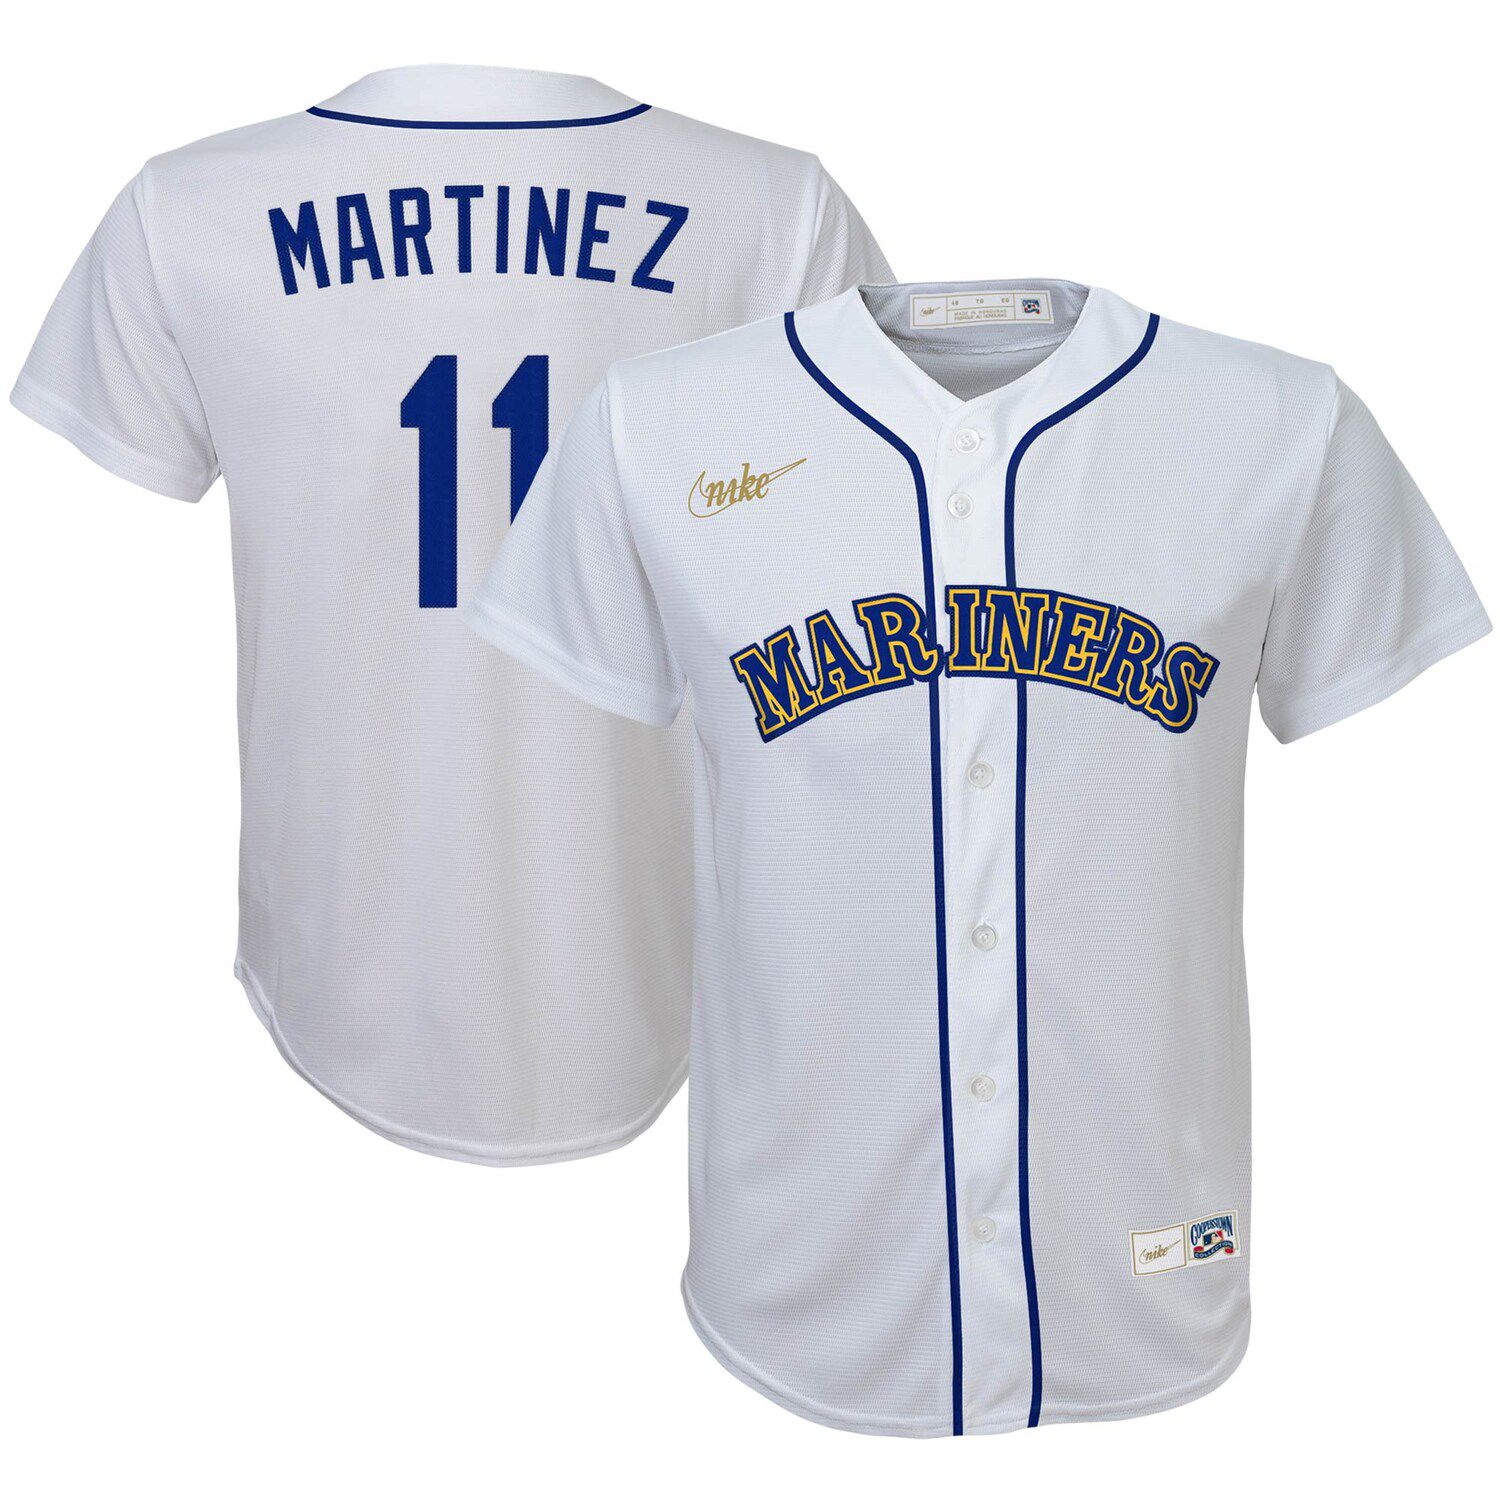 seattle mariners home jersey